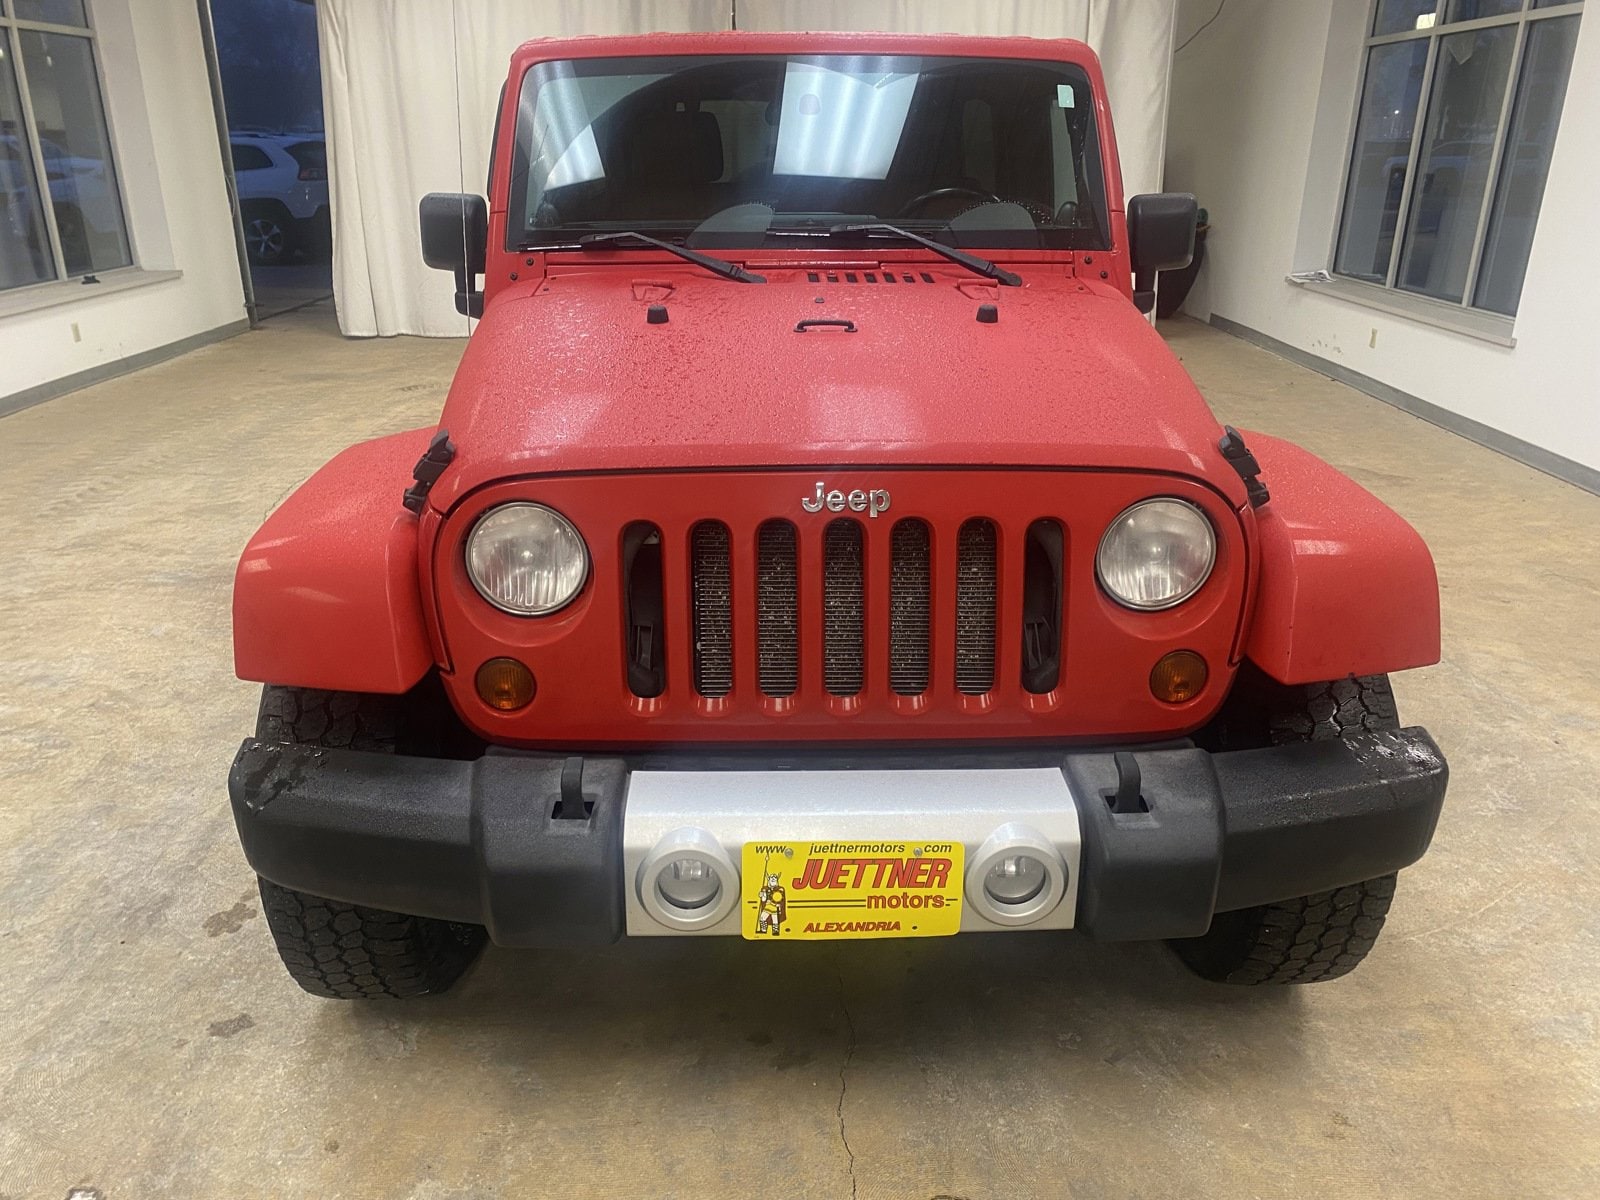 Used 2011 Jeep Wrangler Unlimited Sahara with VIN 1J4BA5H10BL604207 for sale in Alexandria, Minnesota